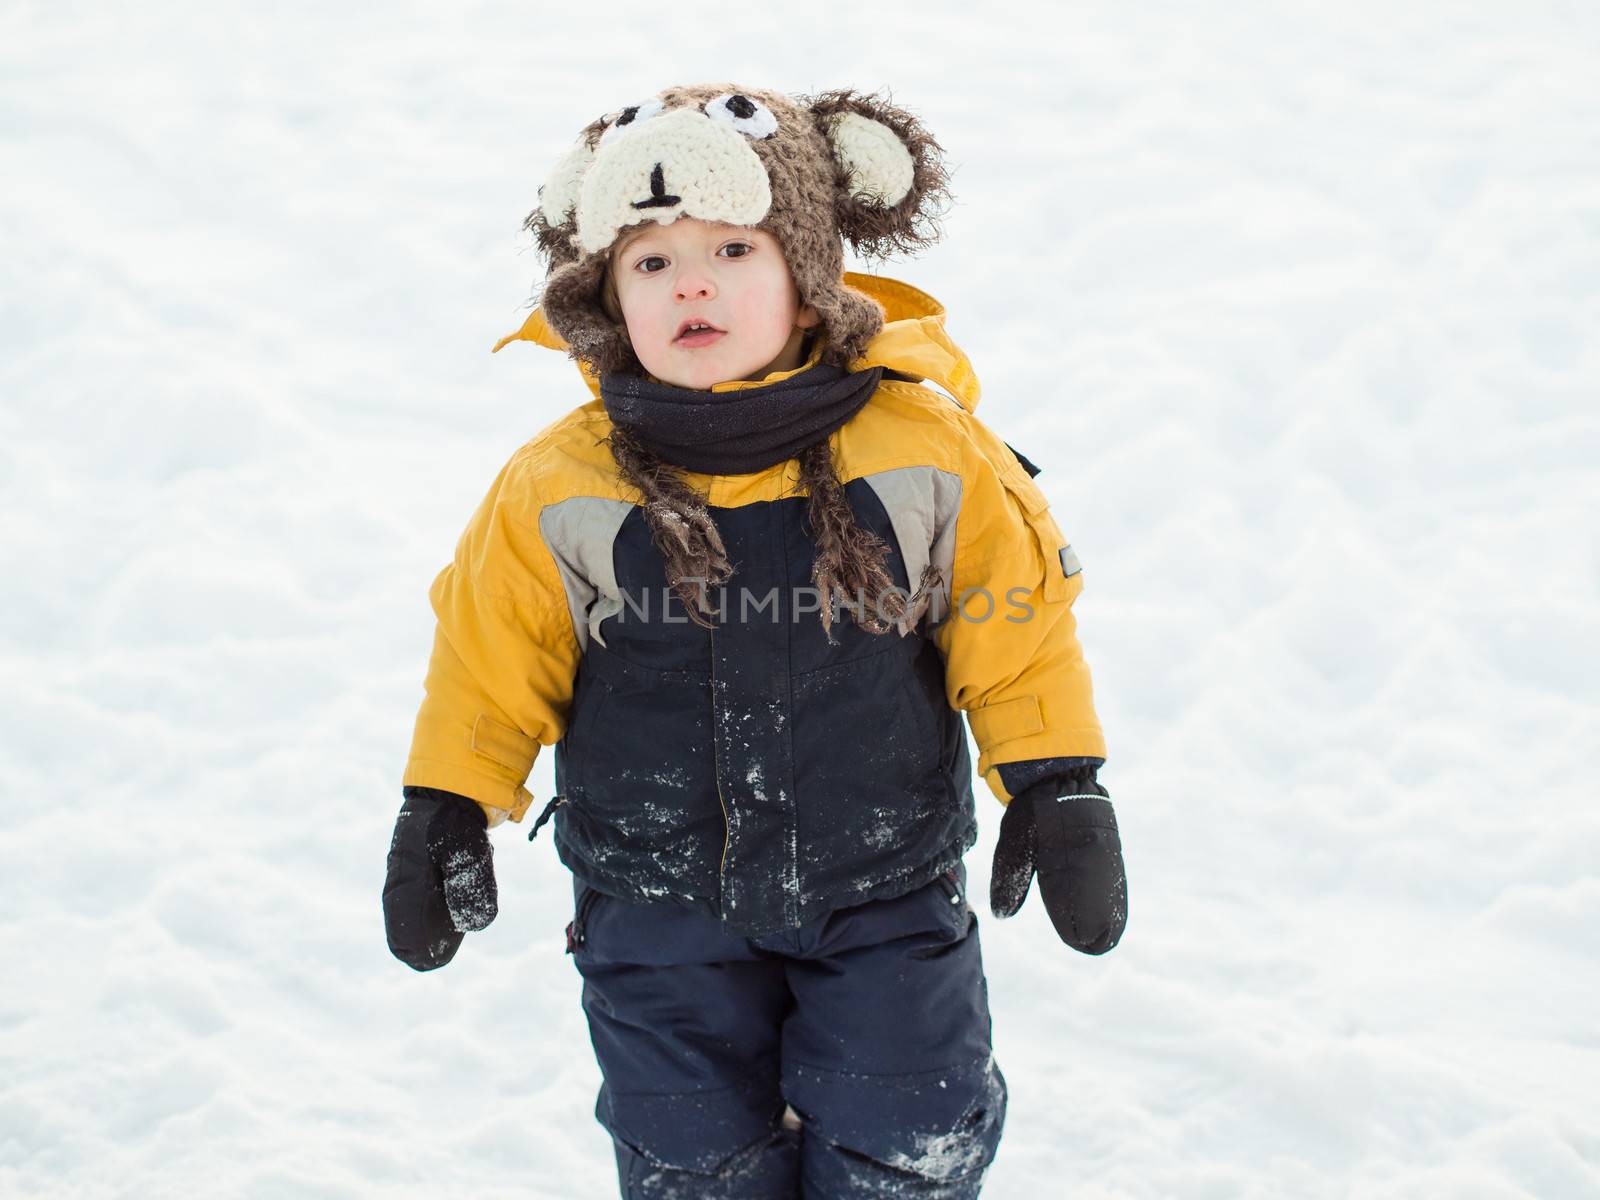 Infant boy playing in the snow